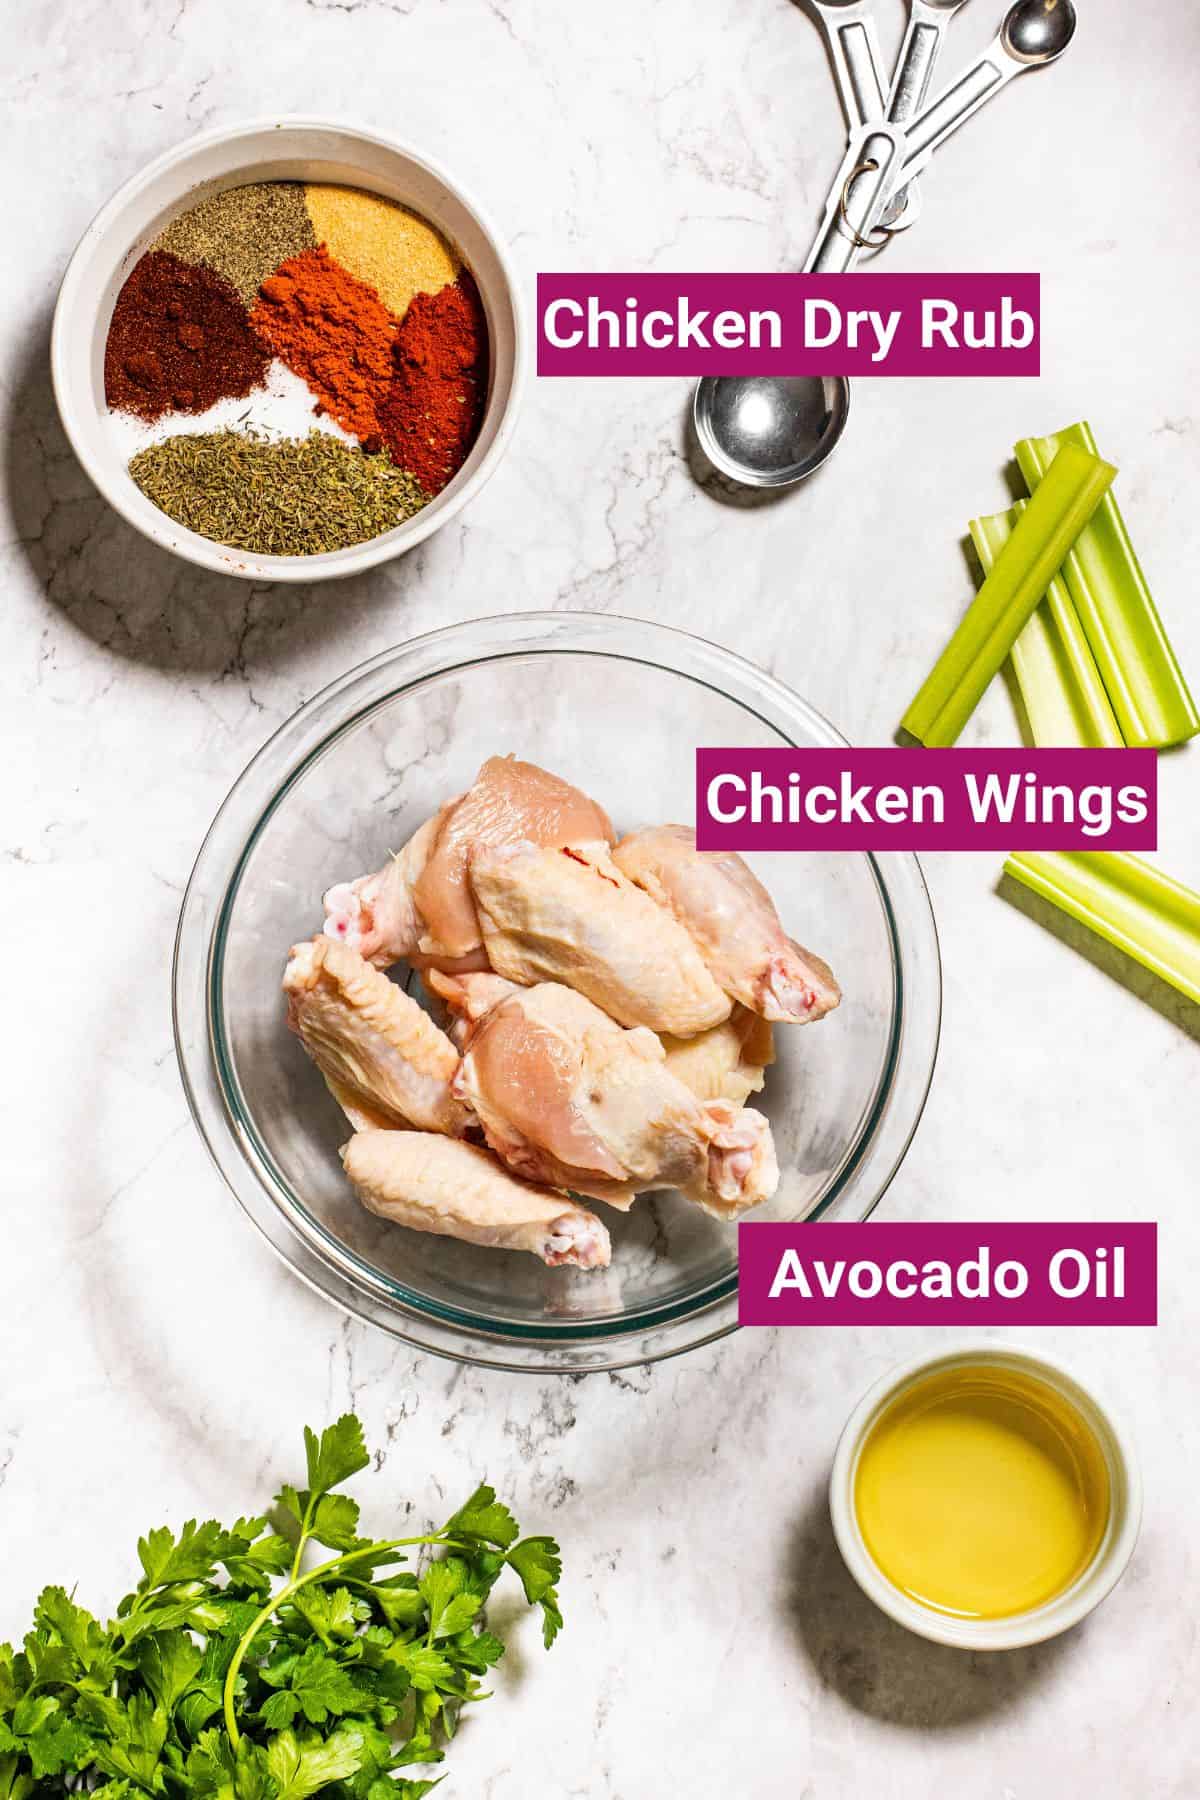 Overhead view of the labeled ingredients needed for spicy dry rub chicken wings: a bowl of raw chicken wings, a bowl of avocado oil, and a bowl of chicken dry rub, next to celery sticks, cilantro, and measuring spoons